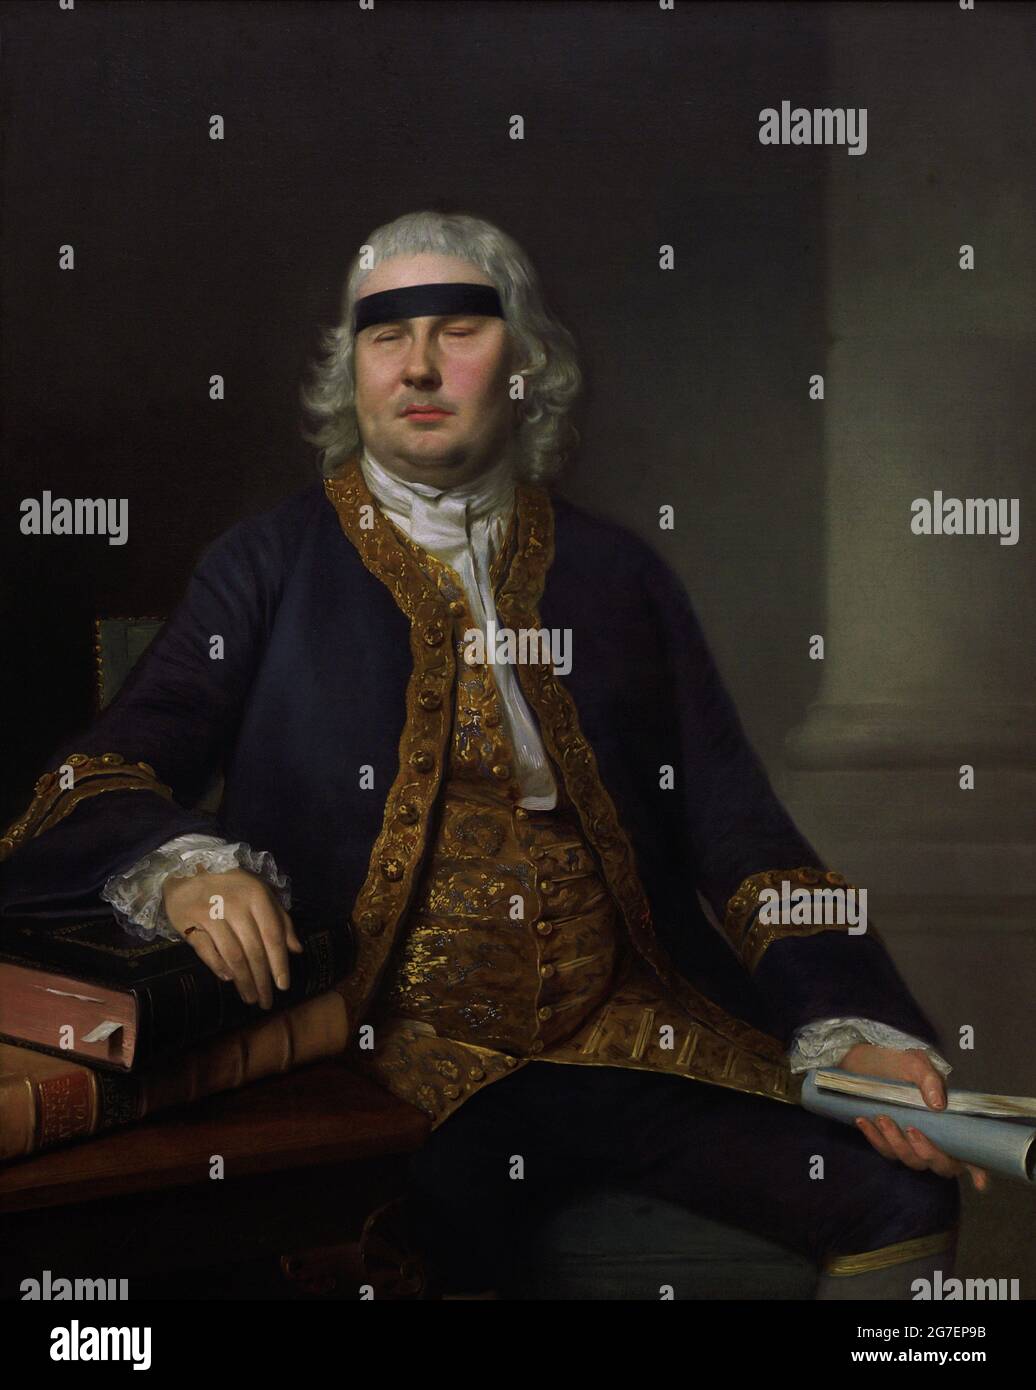 Sir John Fielding (1721-1780). British magistrate and social reformer, nicknamed the Blind Beak. Fielding was blinded in a navy accident at the age of 19. Portrait by Nathaniel Hone (1718-1784). Oil on canvas (124,5x 100,3 cm), 1762. National Portrait Gallery. London, England, United Kingdom. Stock Photo